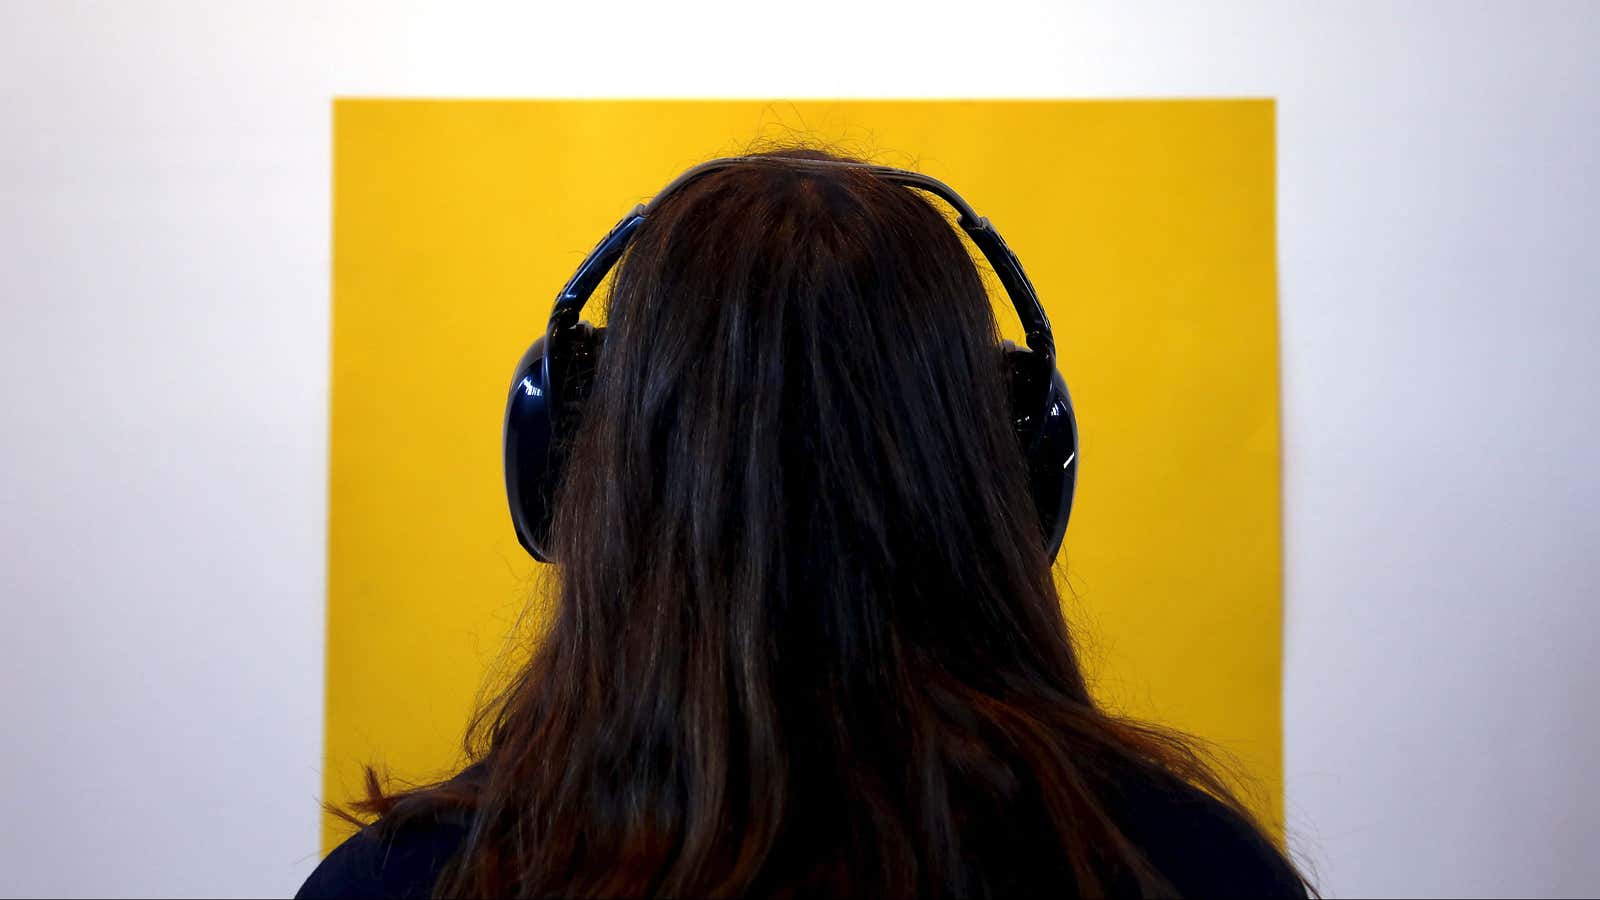 Listening to music between tasks could boost productivity.